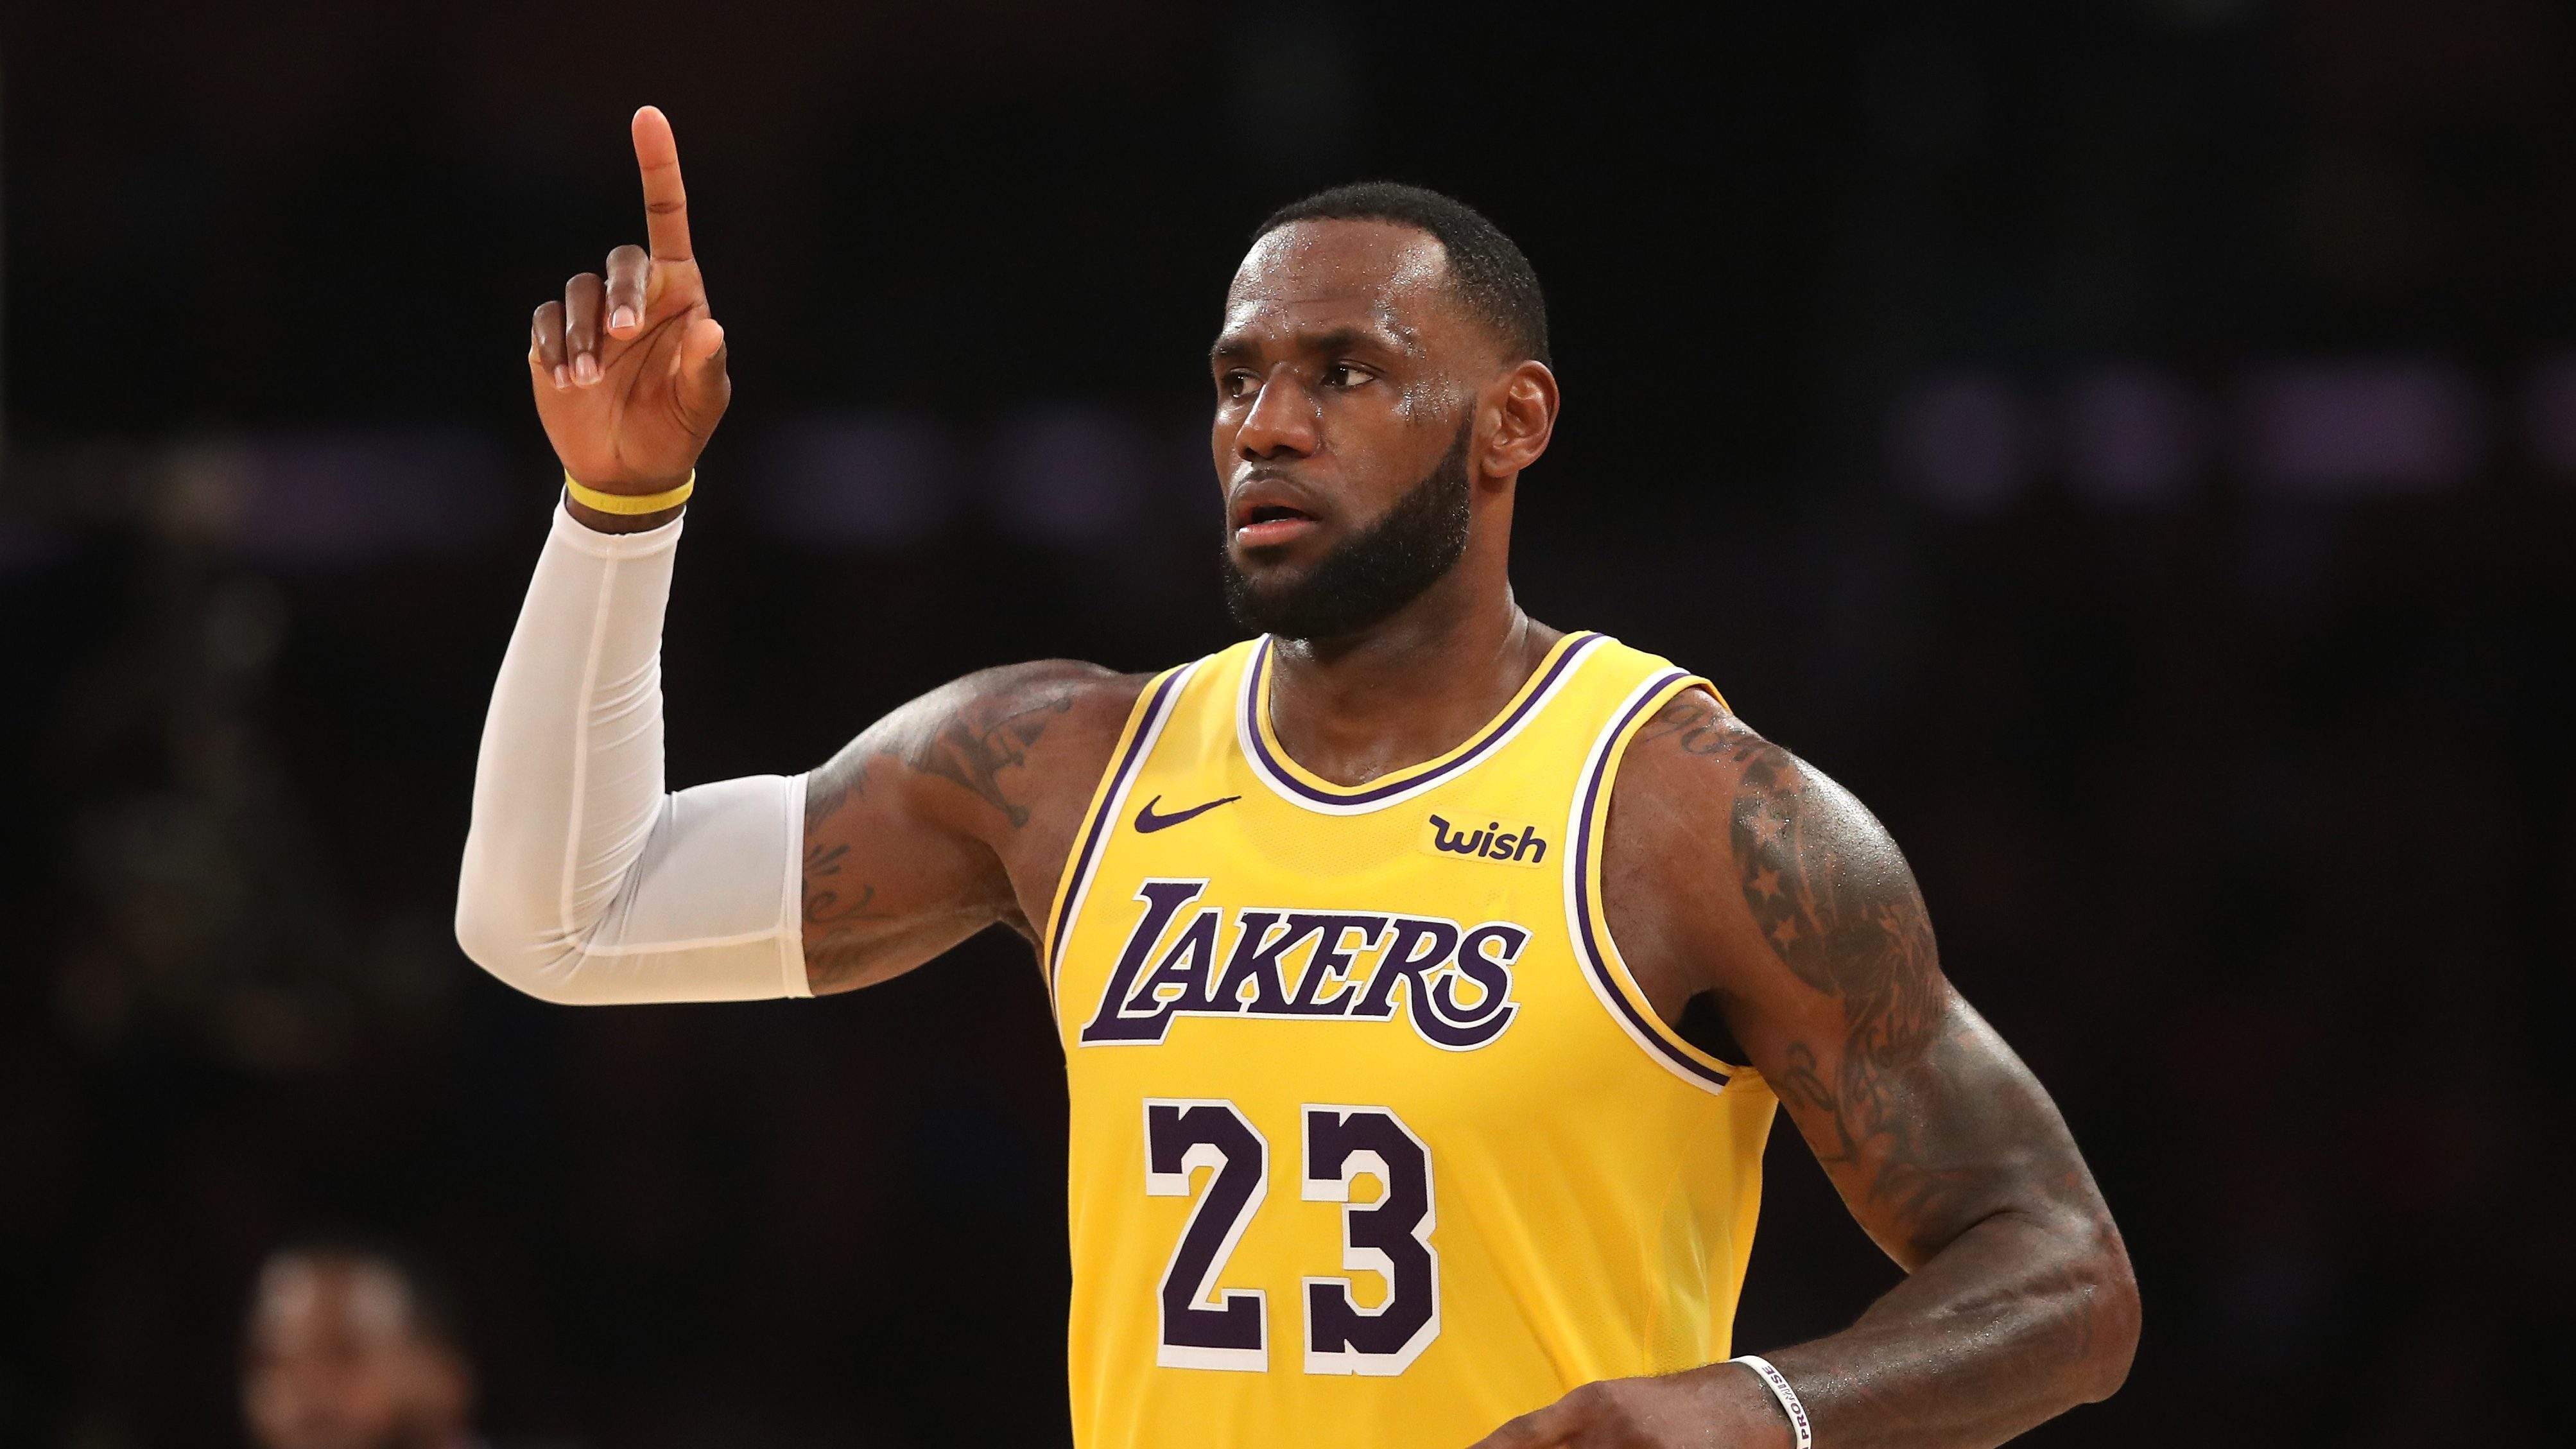 lebron james lakers pictures hd pictures 4k wallpapers high quality images wallpapers hd wallpapers ultra hd wallpapers and images for desktop and cellphone lebron james lakers pictures hd